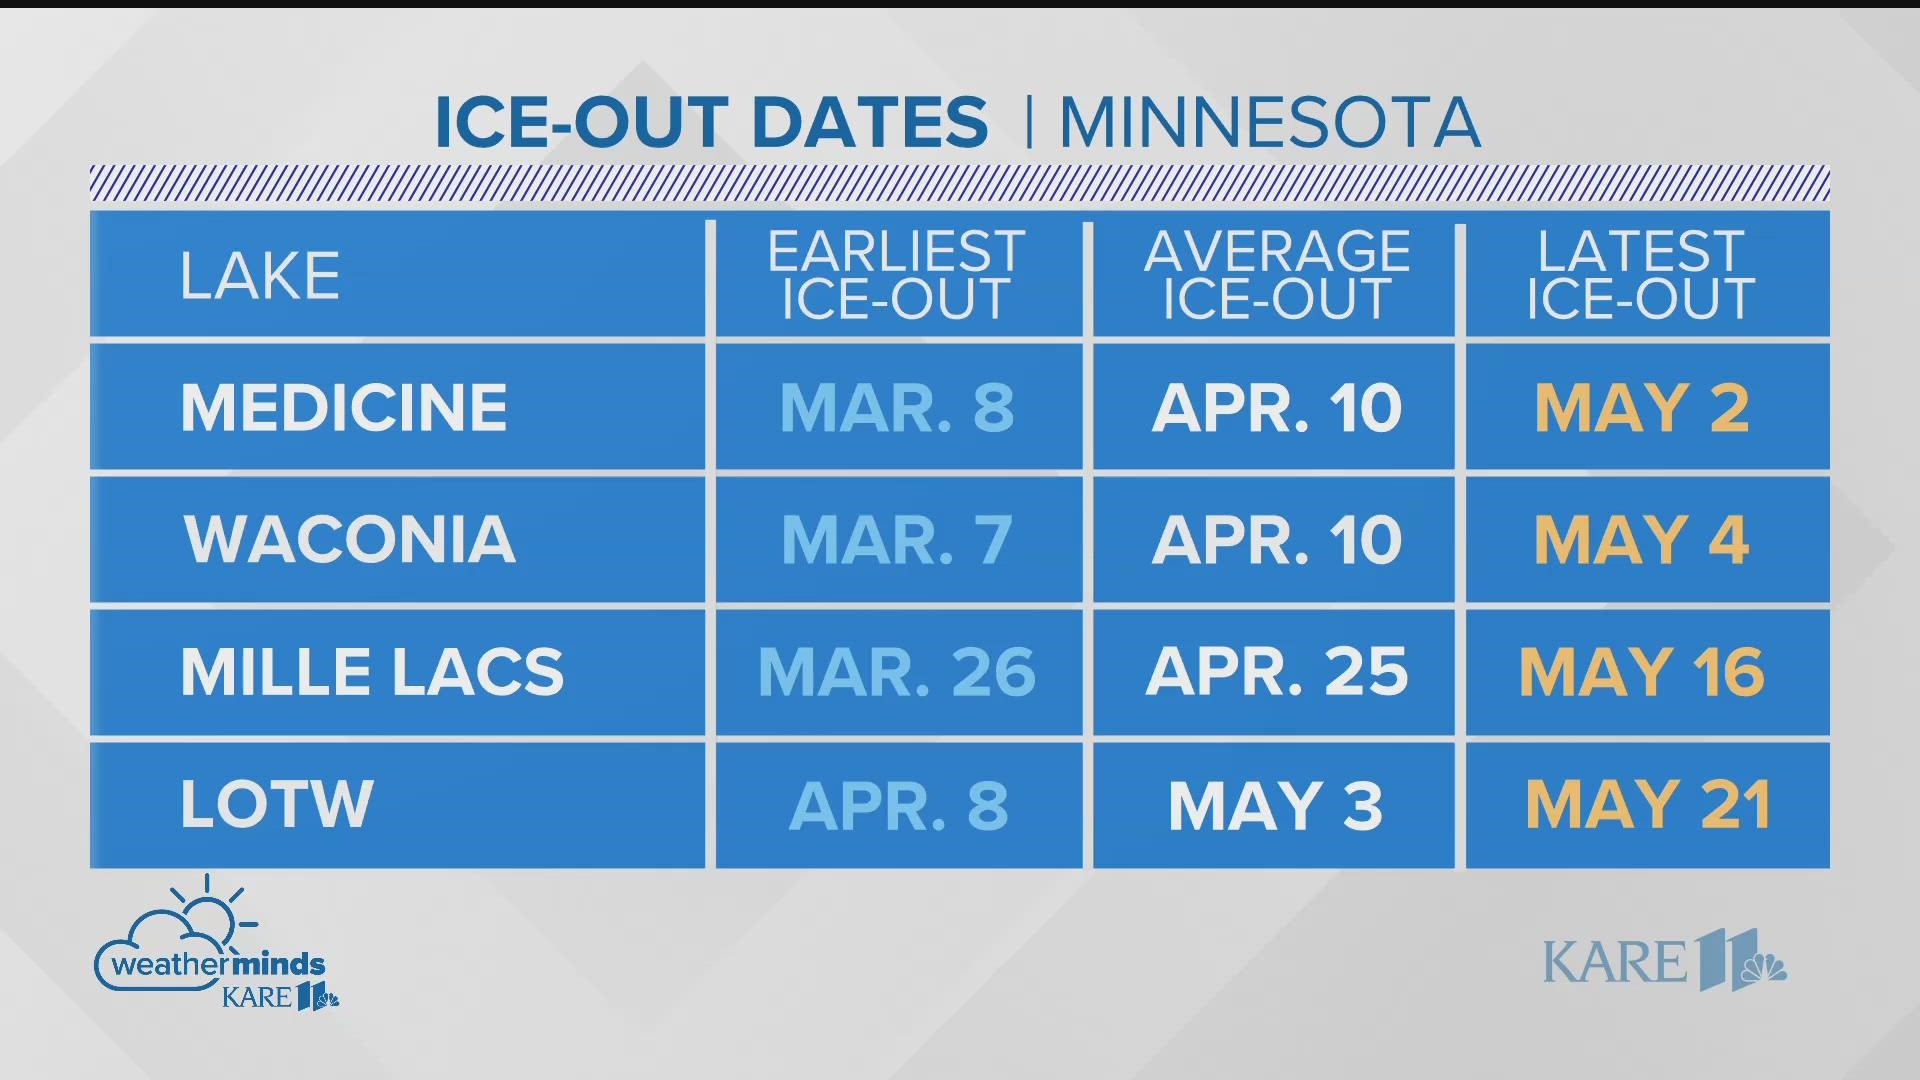 KARE 11 meteorologist Ben Dery explains what "the big melt" is, and why he expects an earlier-than-average ice-out this year.